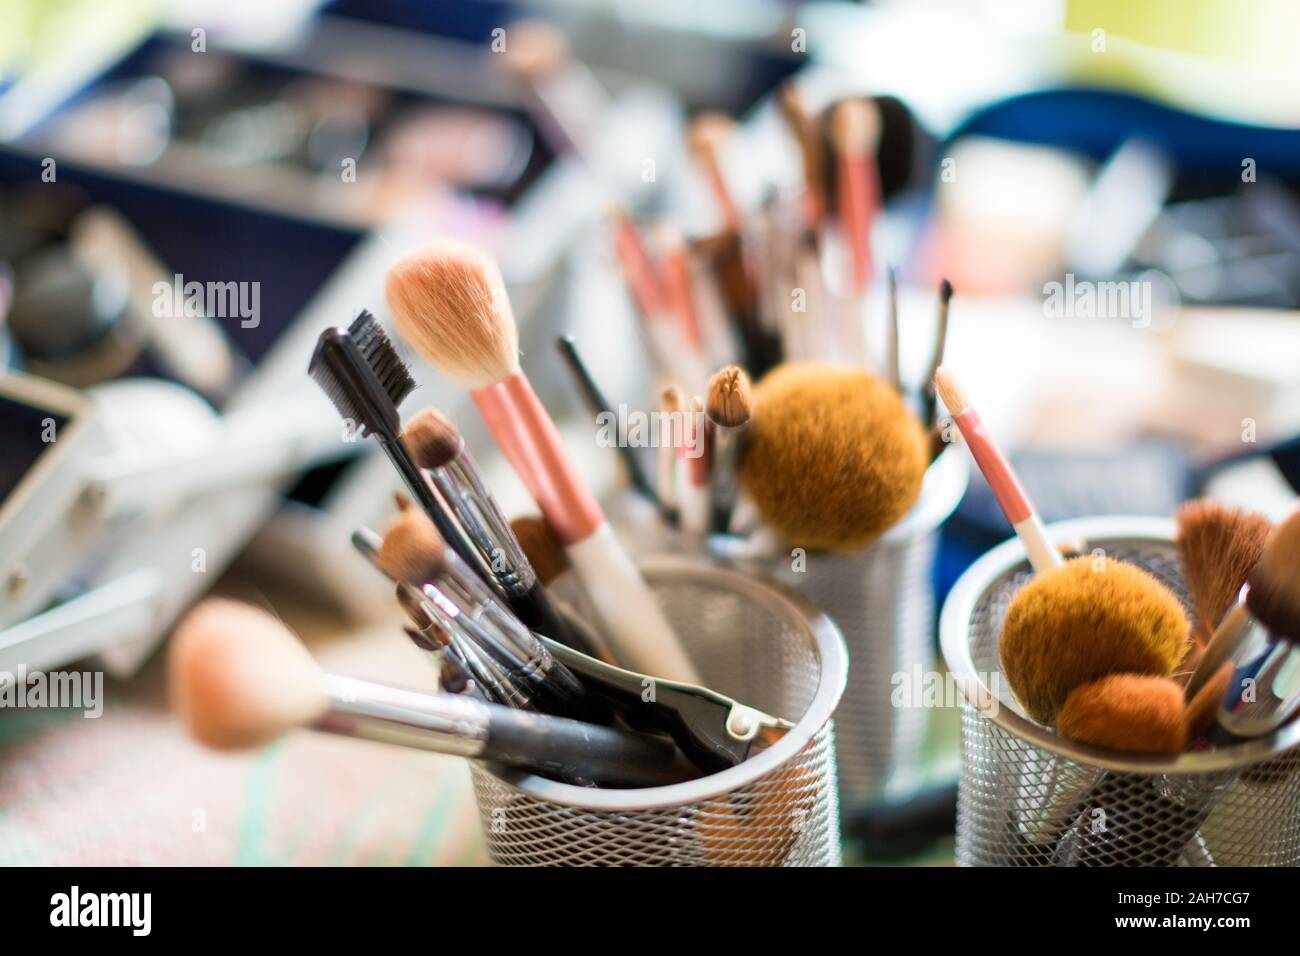 Close up of a set of make up brushes against a bokeh background Stock Photo